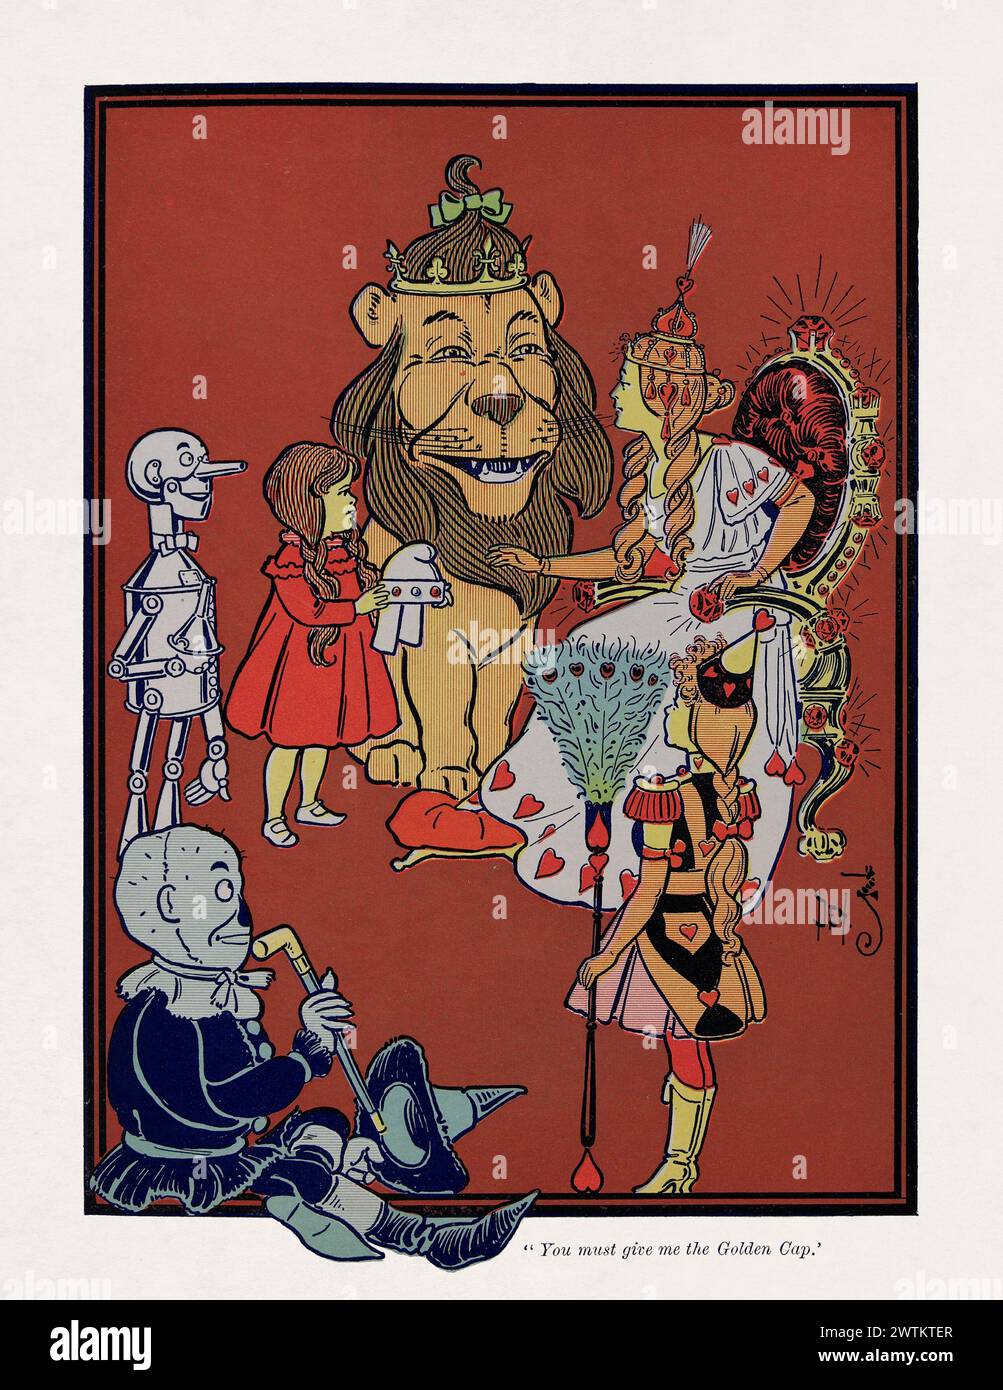 Illustration from 'The wonderful Wizard of Oz', a children's novel written by L. Frank Baum and illustrated by W. W. Denslow in  1900. Stock Photo